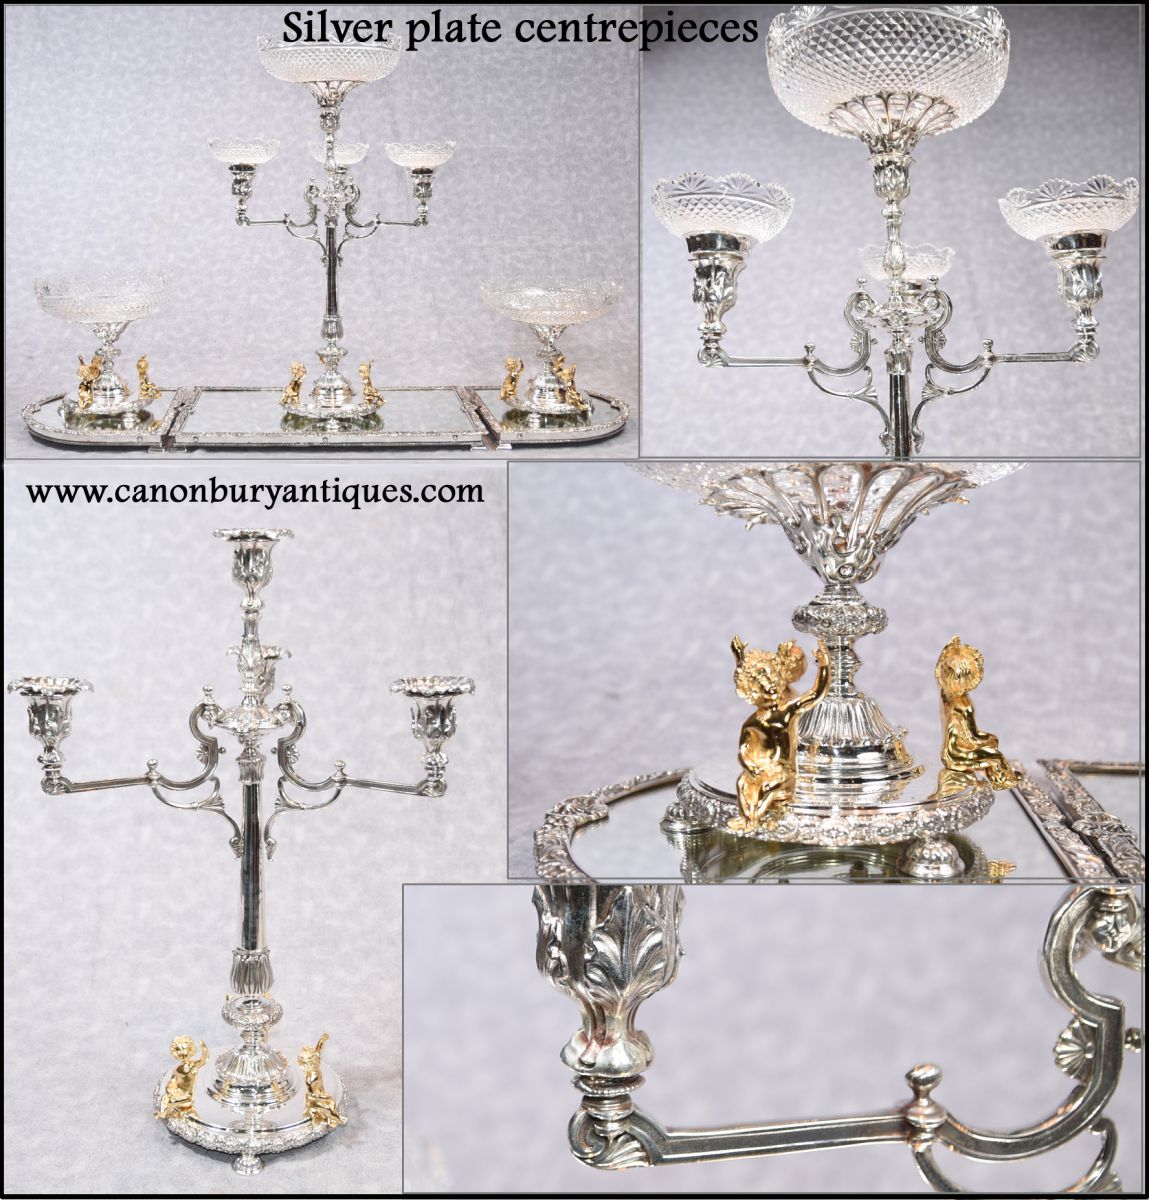 Silver plate epergne centerpiece with gold plated cherubs